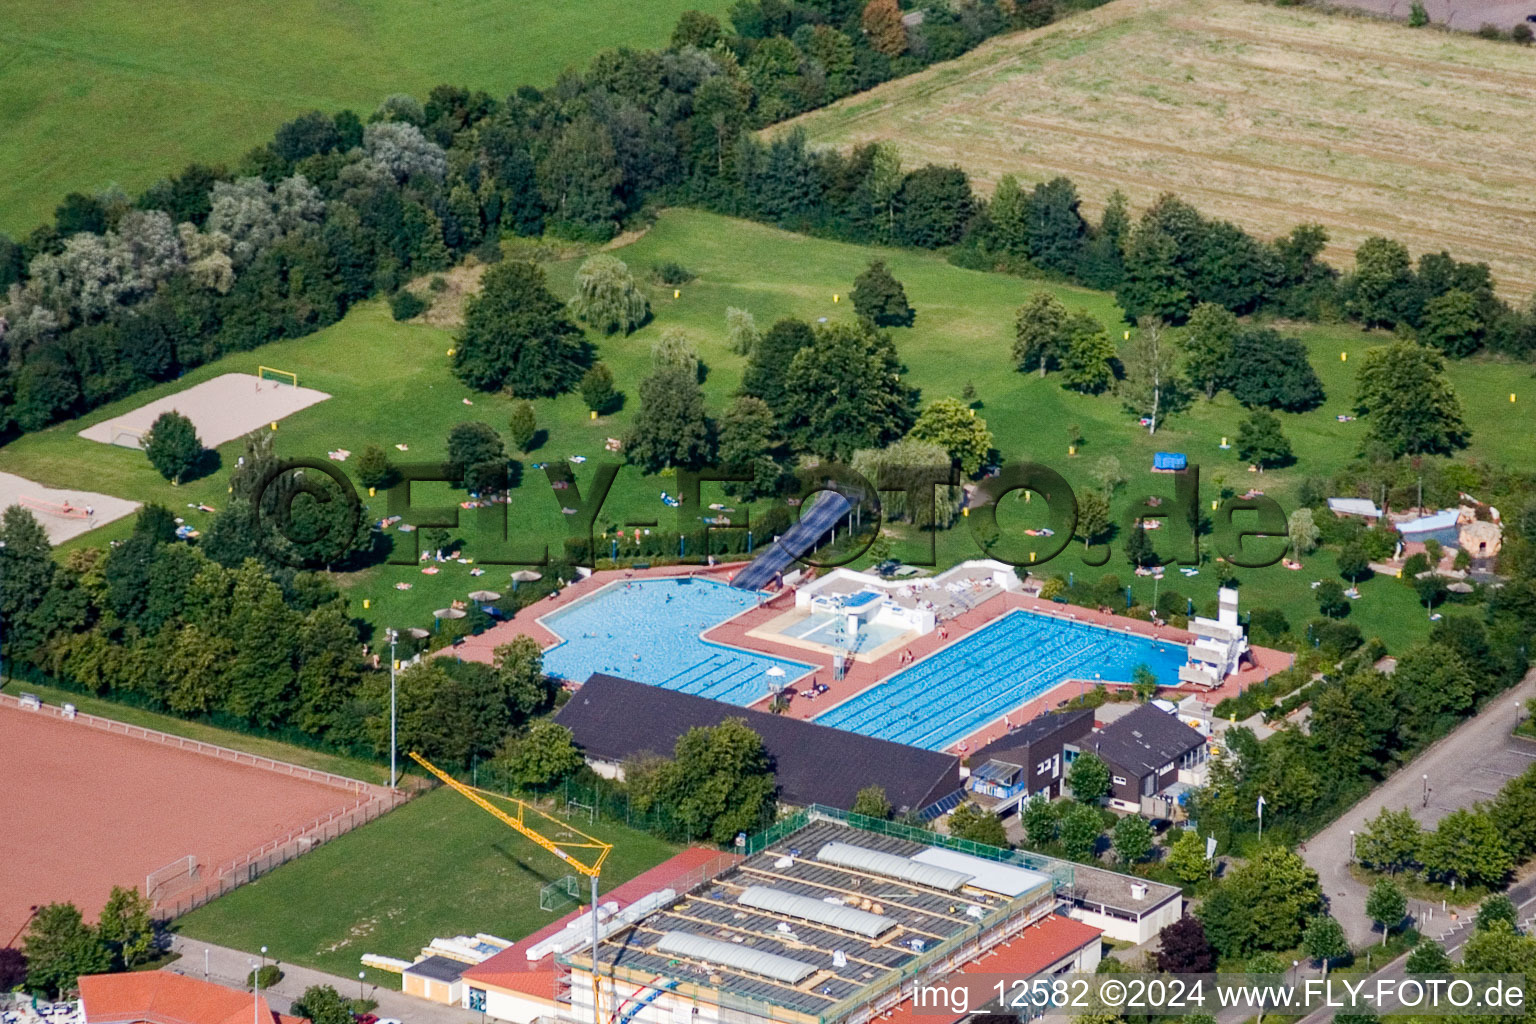 Aerial view of Outdoor pool in Offenbach an der Queich in the state Rhineland-Palatinate, Germany